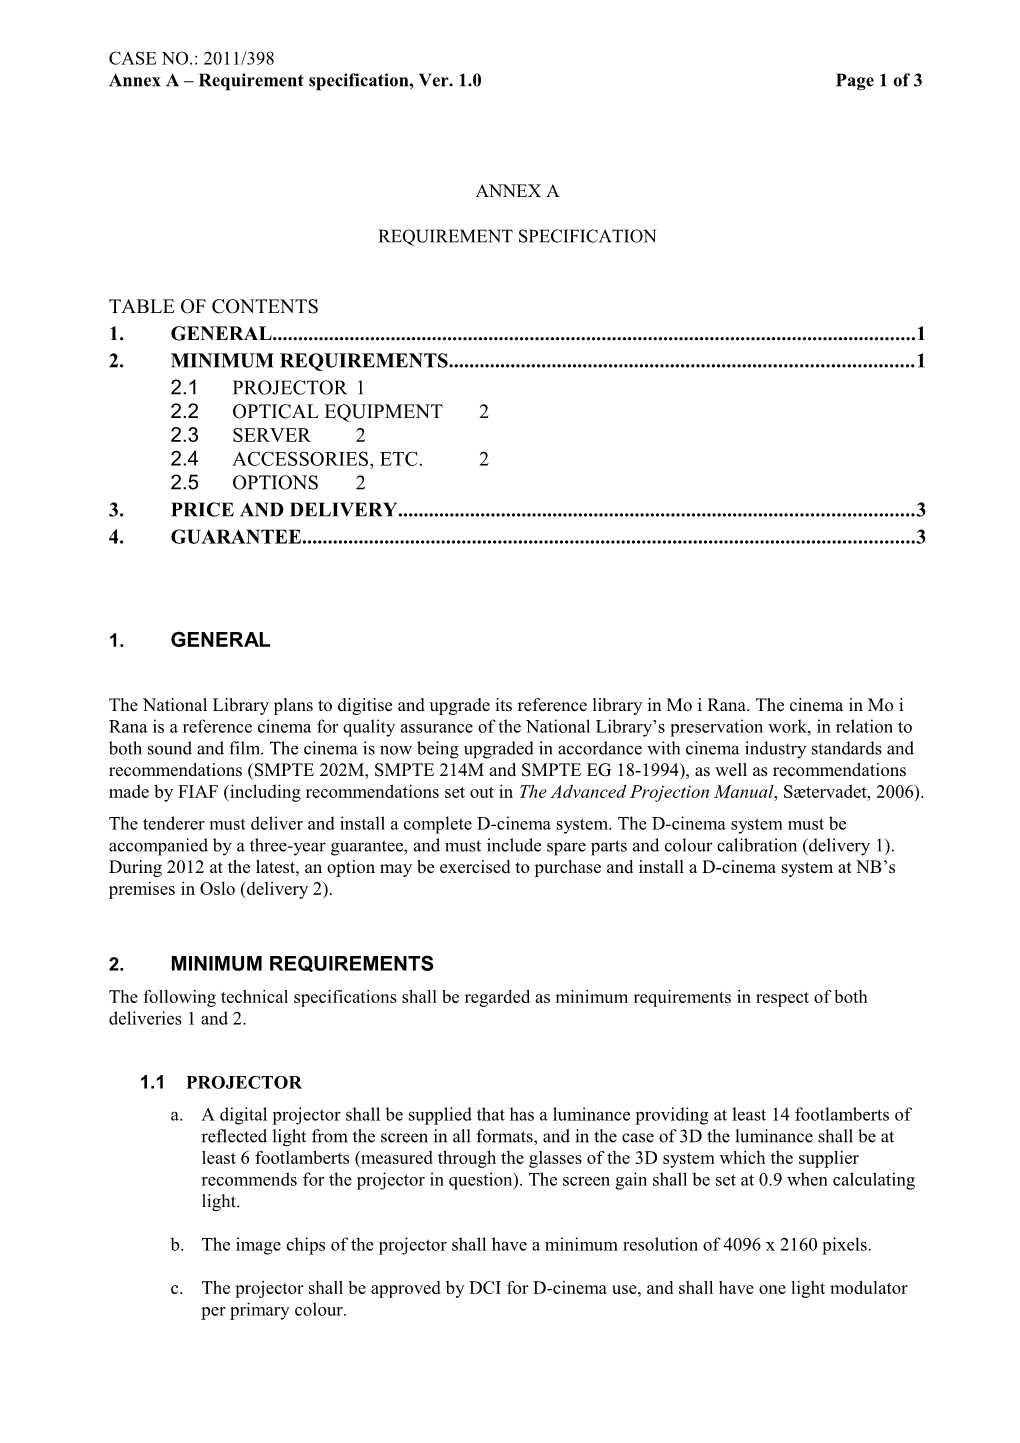 Annex a Requirement Specification, Ver. 1.0Page1of3